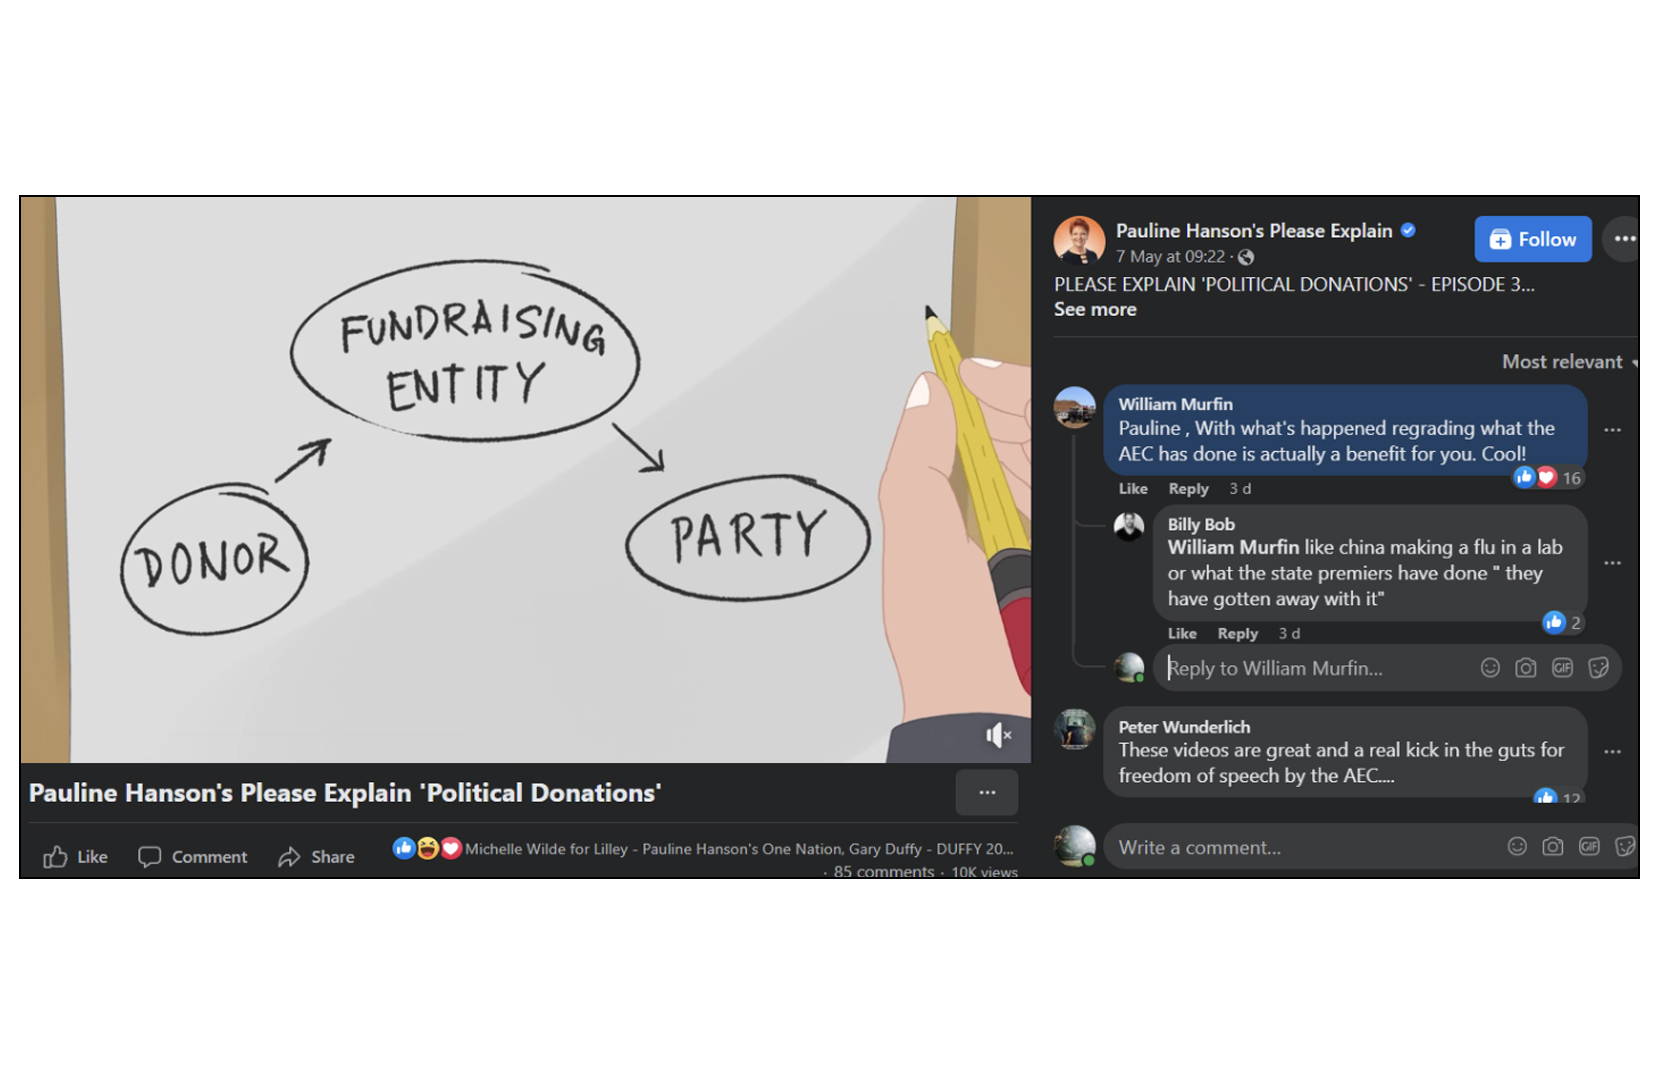 A screenshot showing a frame of the animation and comments on the Facebook post where it is playing.